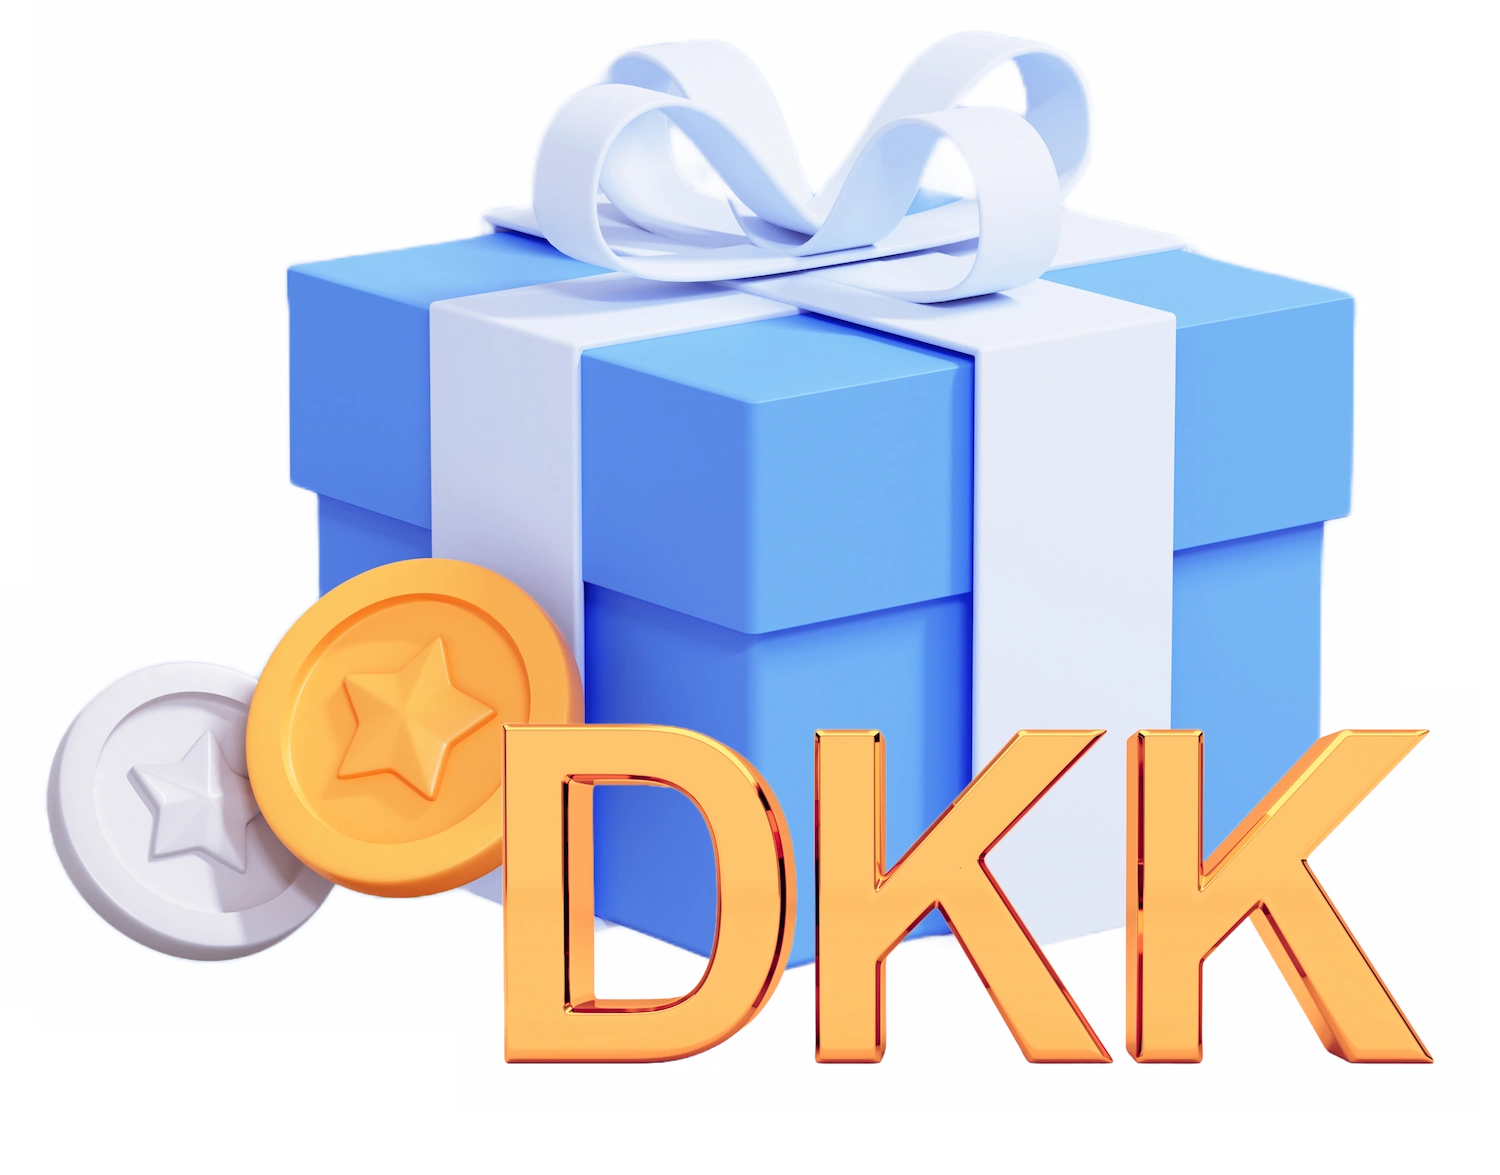 DKK bookmakers -  Best bookmakers From Denmark and Bookmakers that accept the Danish Krona for deposit and withdrawals